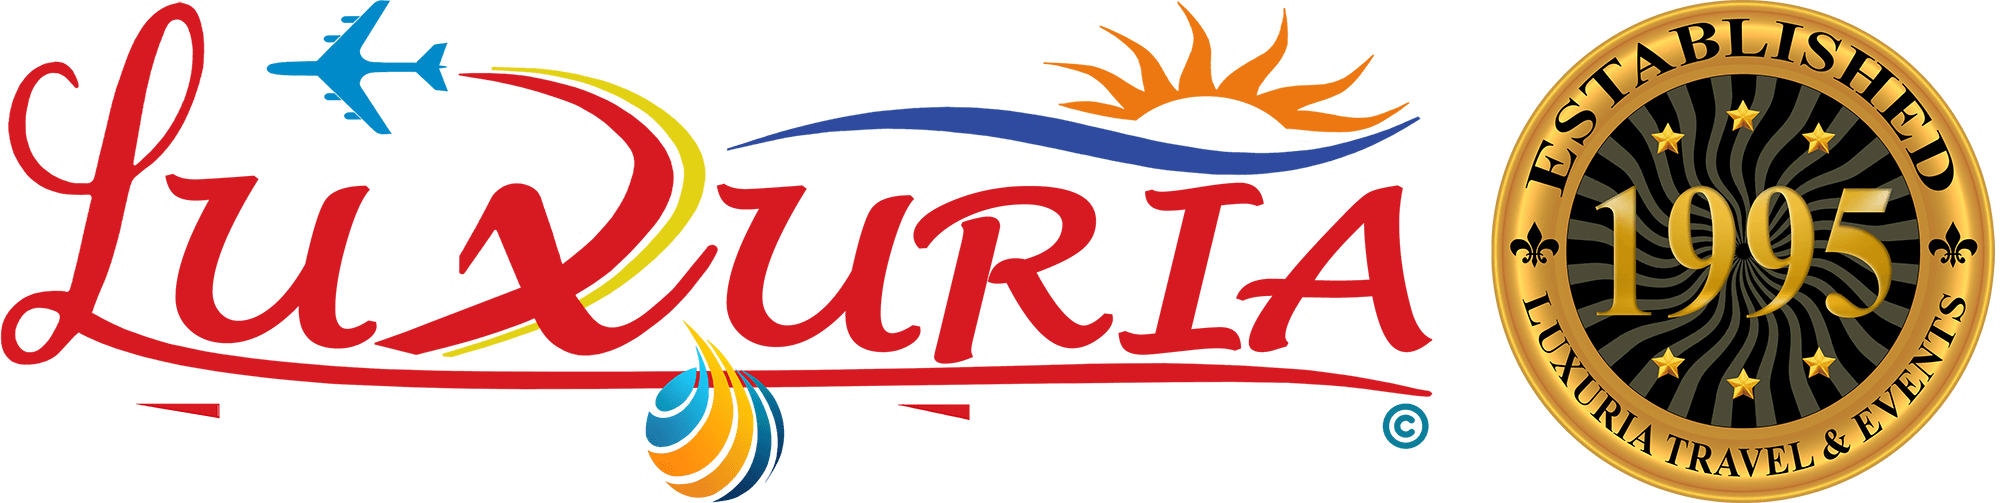 Luxuria Travel & Events | World’s Second Best Attraction is in the UAE! ⋆ Luxuria Travel & Events